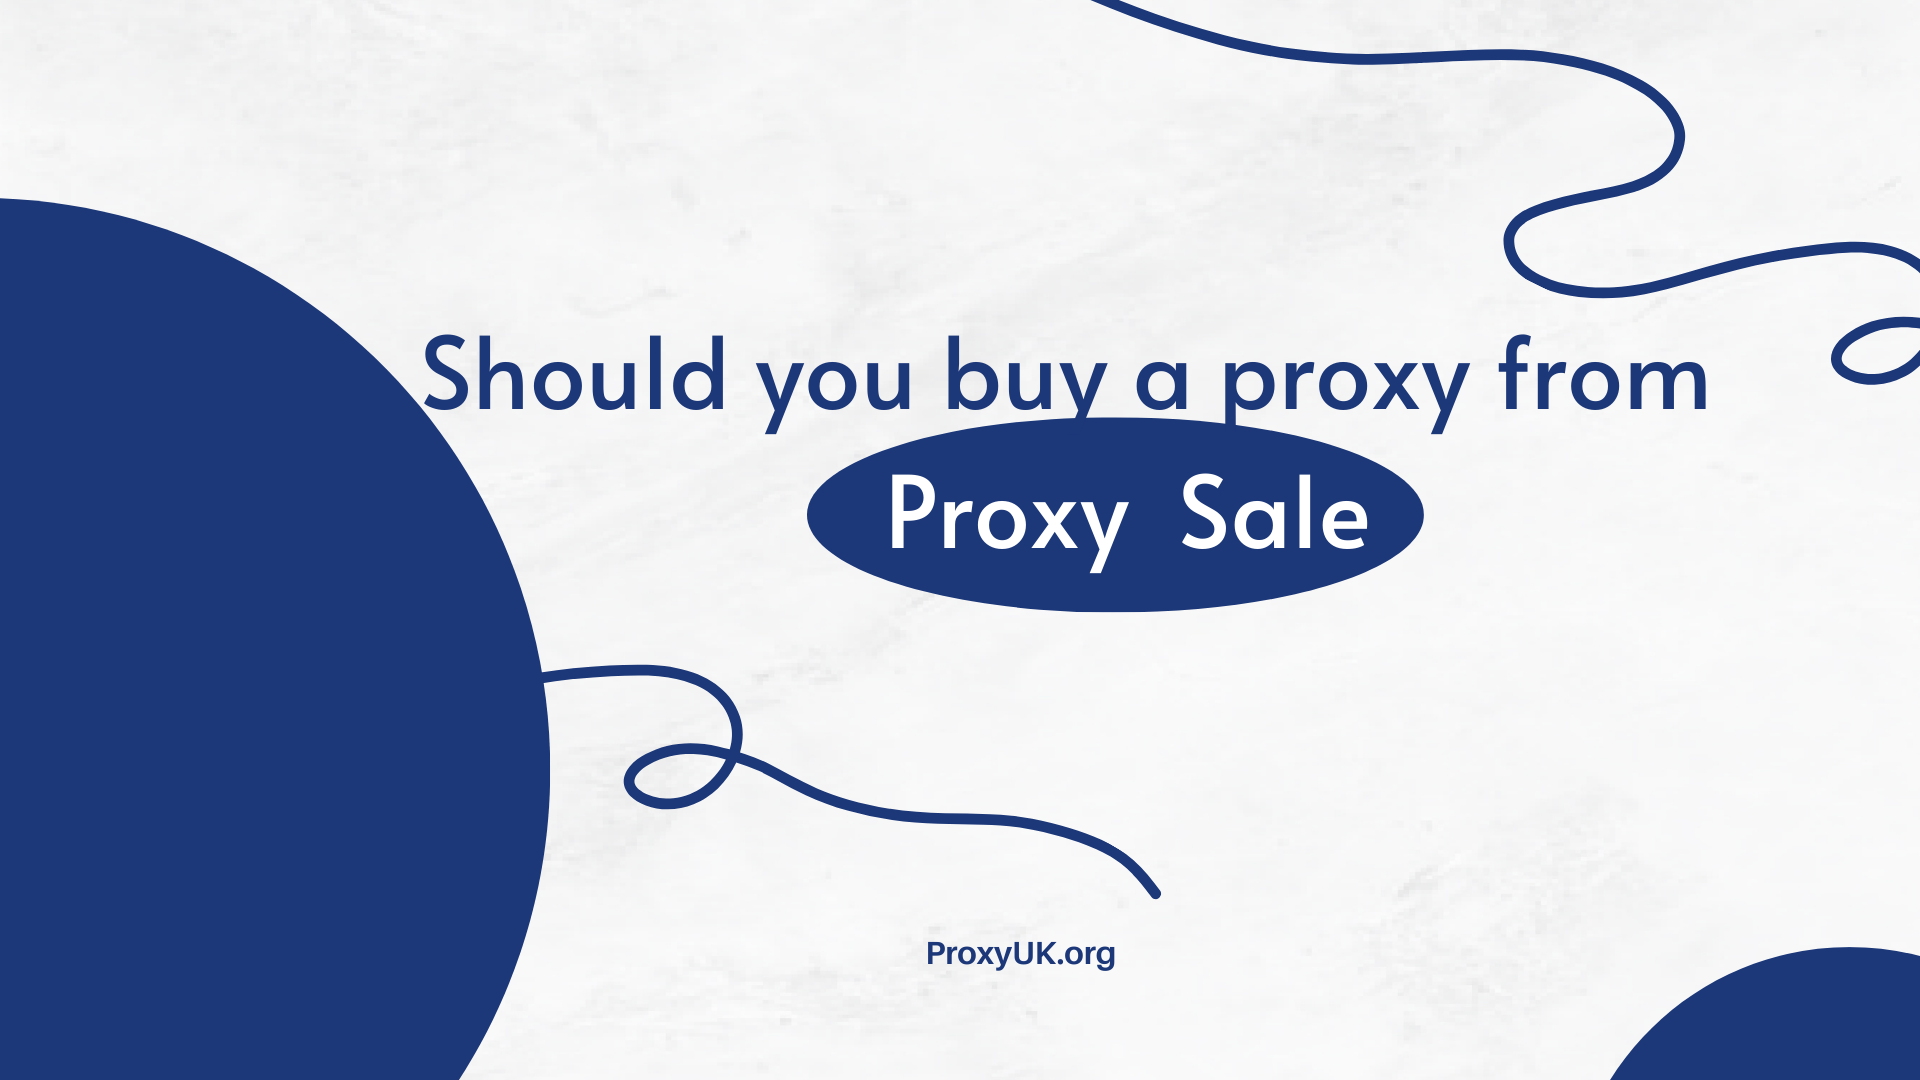 Should you buy a proxy from Proxy Sale